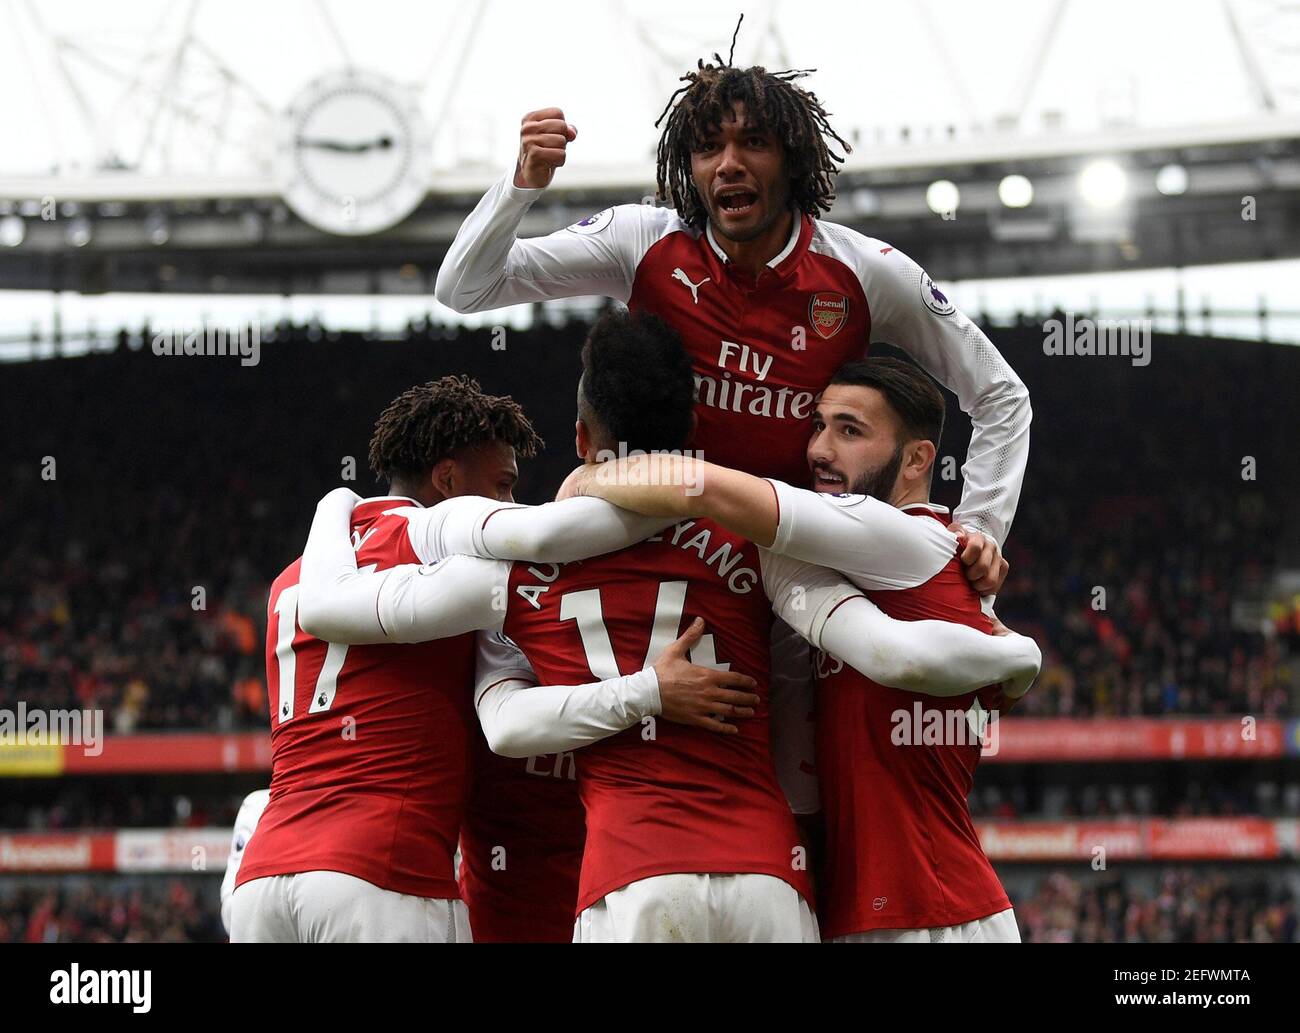 Soccer Football - Premier League - Arsenal vs Watford - Emirates Stadium, London, Britain - March 11, 2018   Arsenal's Pierre-Emerick Aubameyang celebrates scoring their second goal with team mates            Action Images via Reuters/Tony O'Brien    EDITORIAL USE ONLY. No use with unauthorized audio, video, data, fixture lists, club/league logos or 'live' services. Online in-match use limited to 75 images, no video emulation. No use in betting, games or single club/league/player publications.  Please contact your account representative for further details. Stock Photo